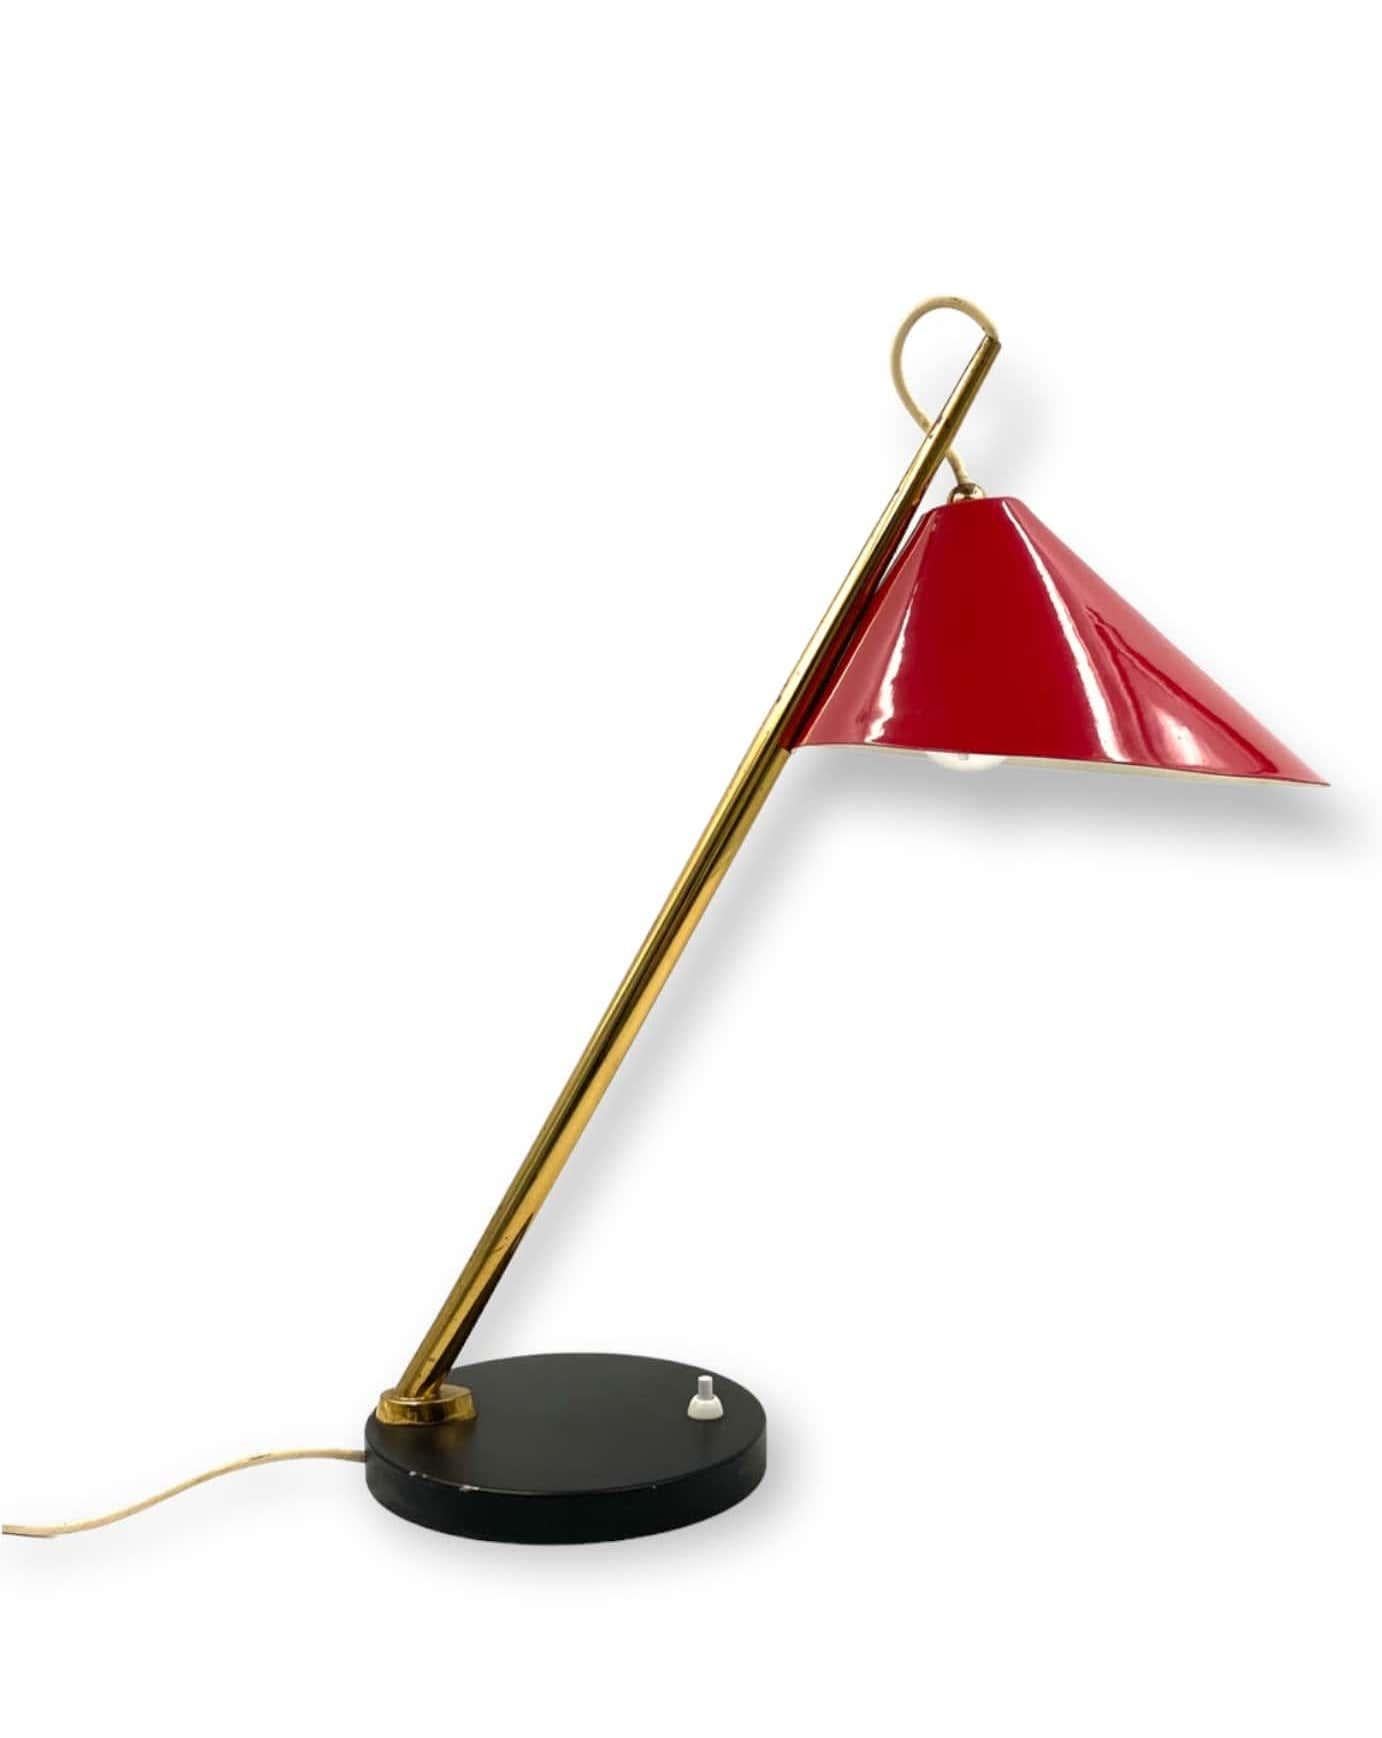 Italian Midcentury Red Table Lamp, Lumen, Italy, 1960s For Sale